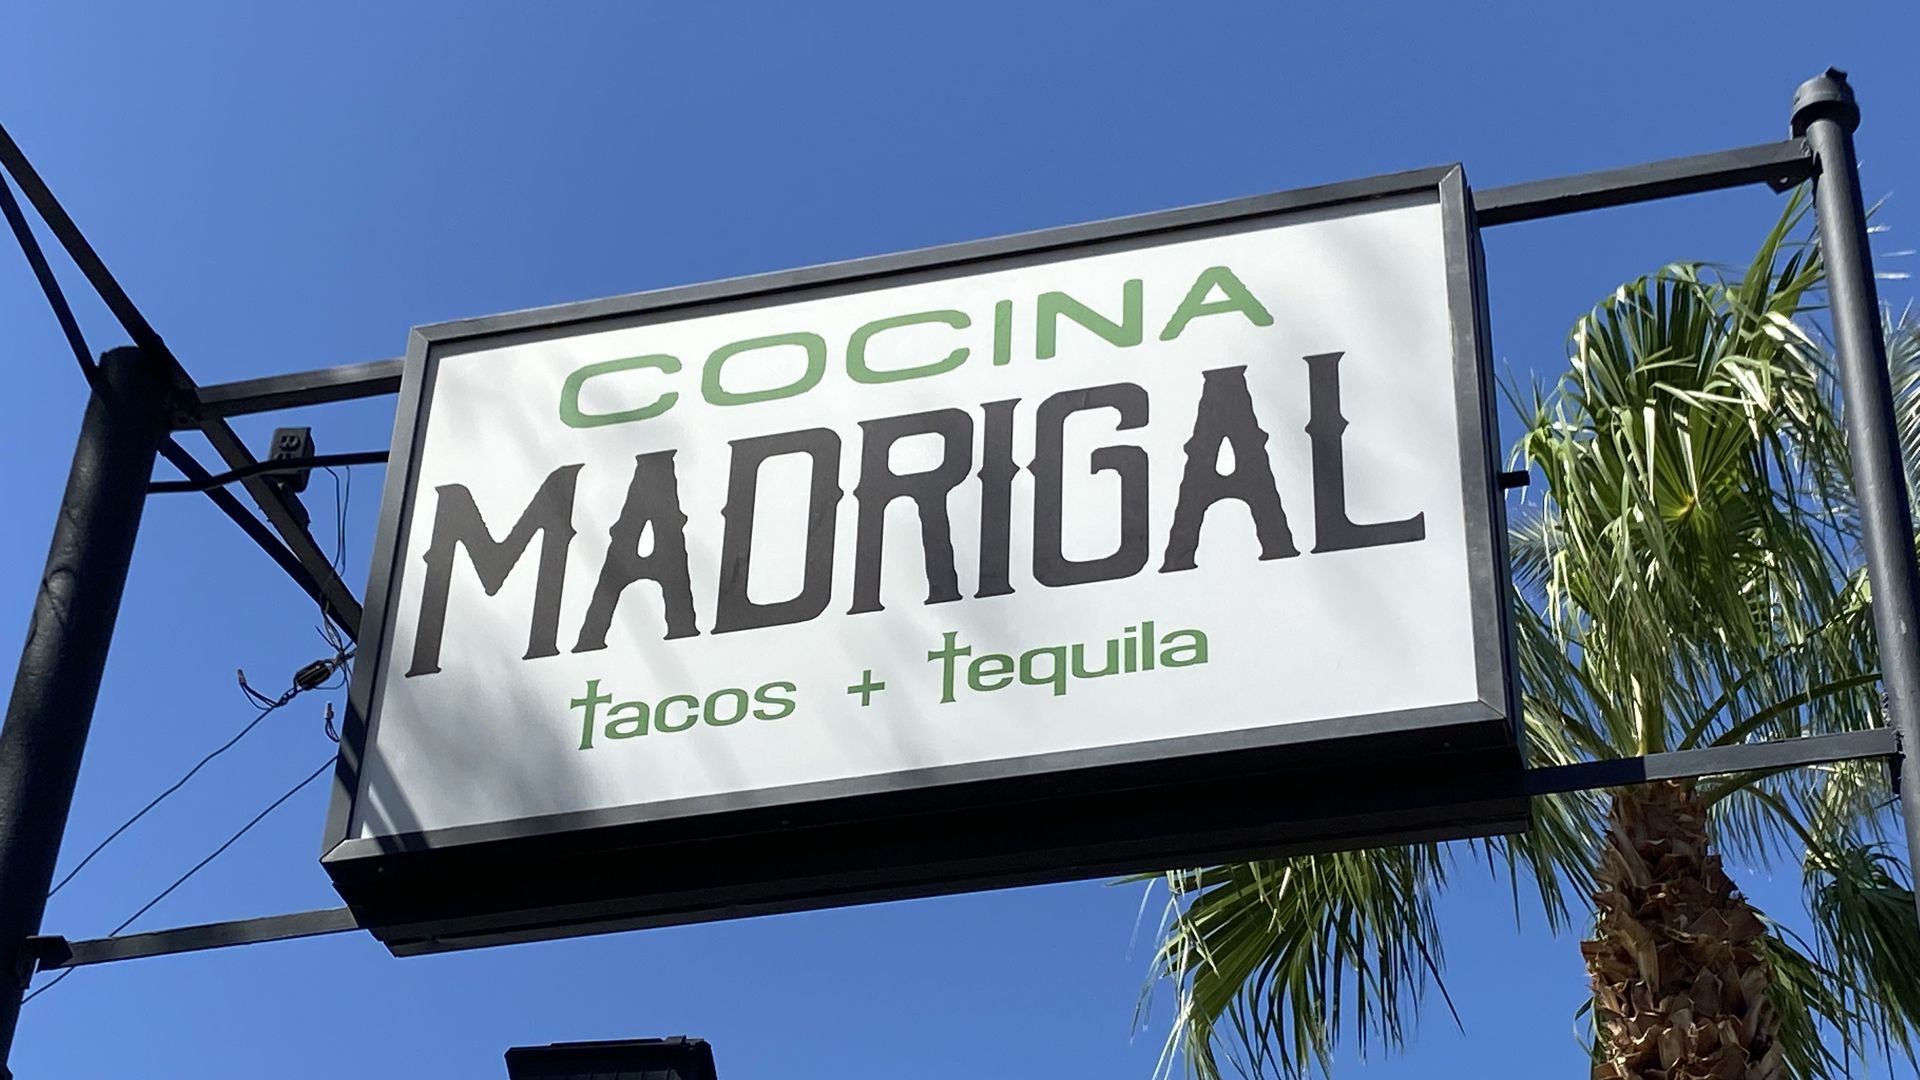 A sign that says, "COCINA MADRIGAL tacos + tequila."